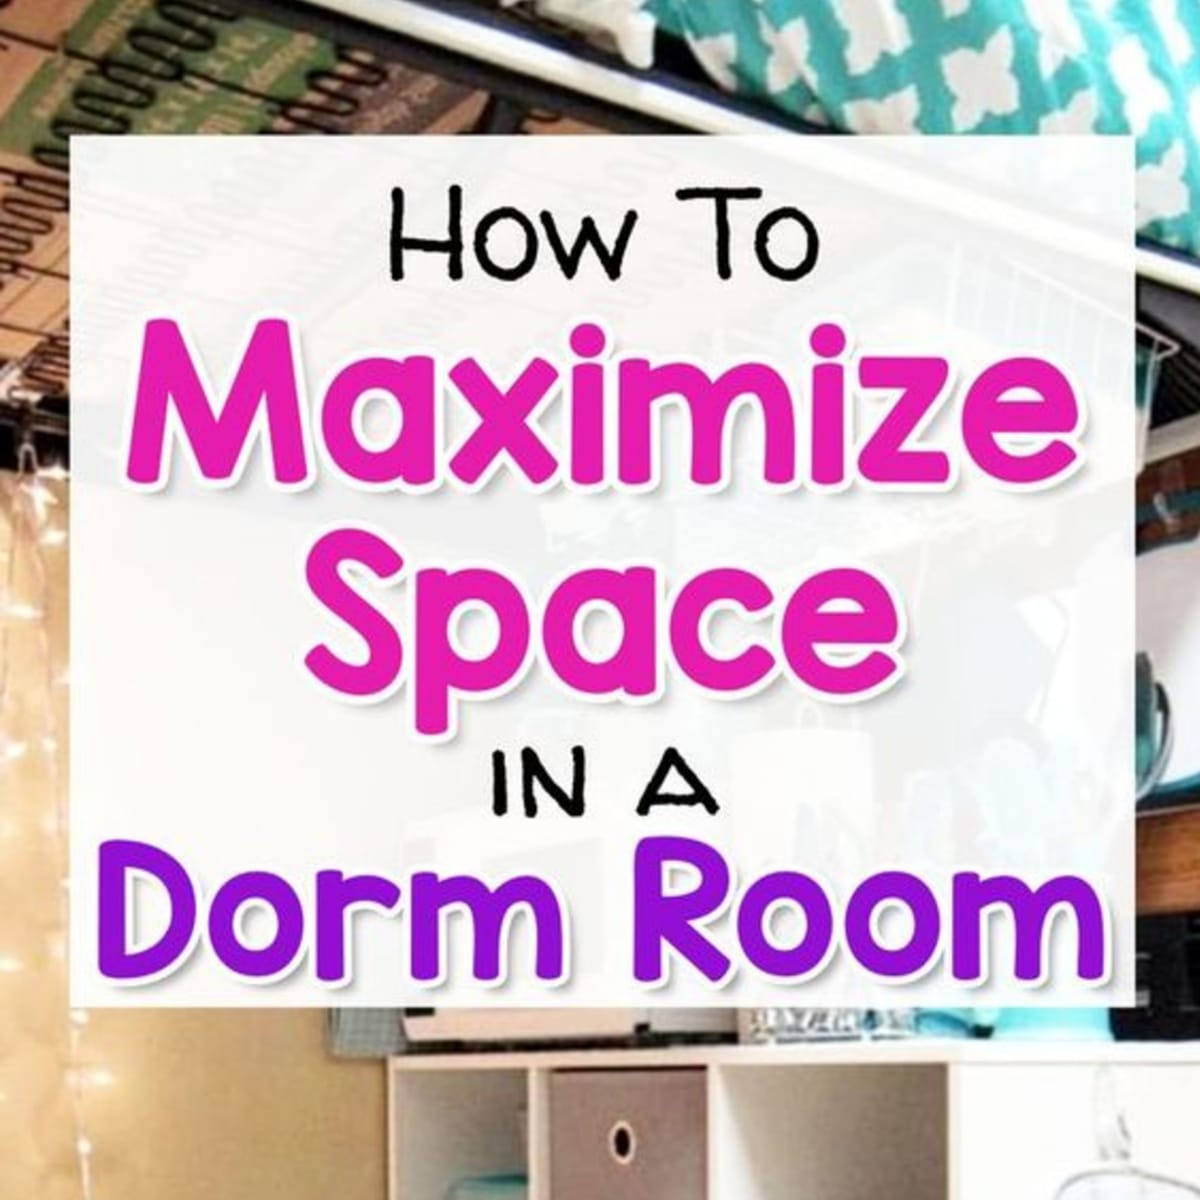 Dorm Room Solutions: How To Maximize Space in a Dorm Room - dorm space saver ideas, organization hacks and storage ideas for guys, gals and for shared dorm rooms